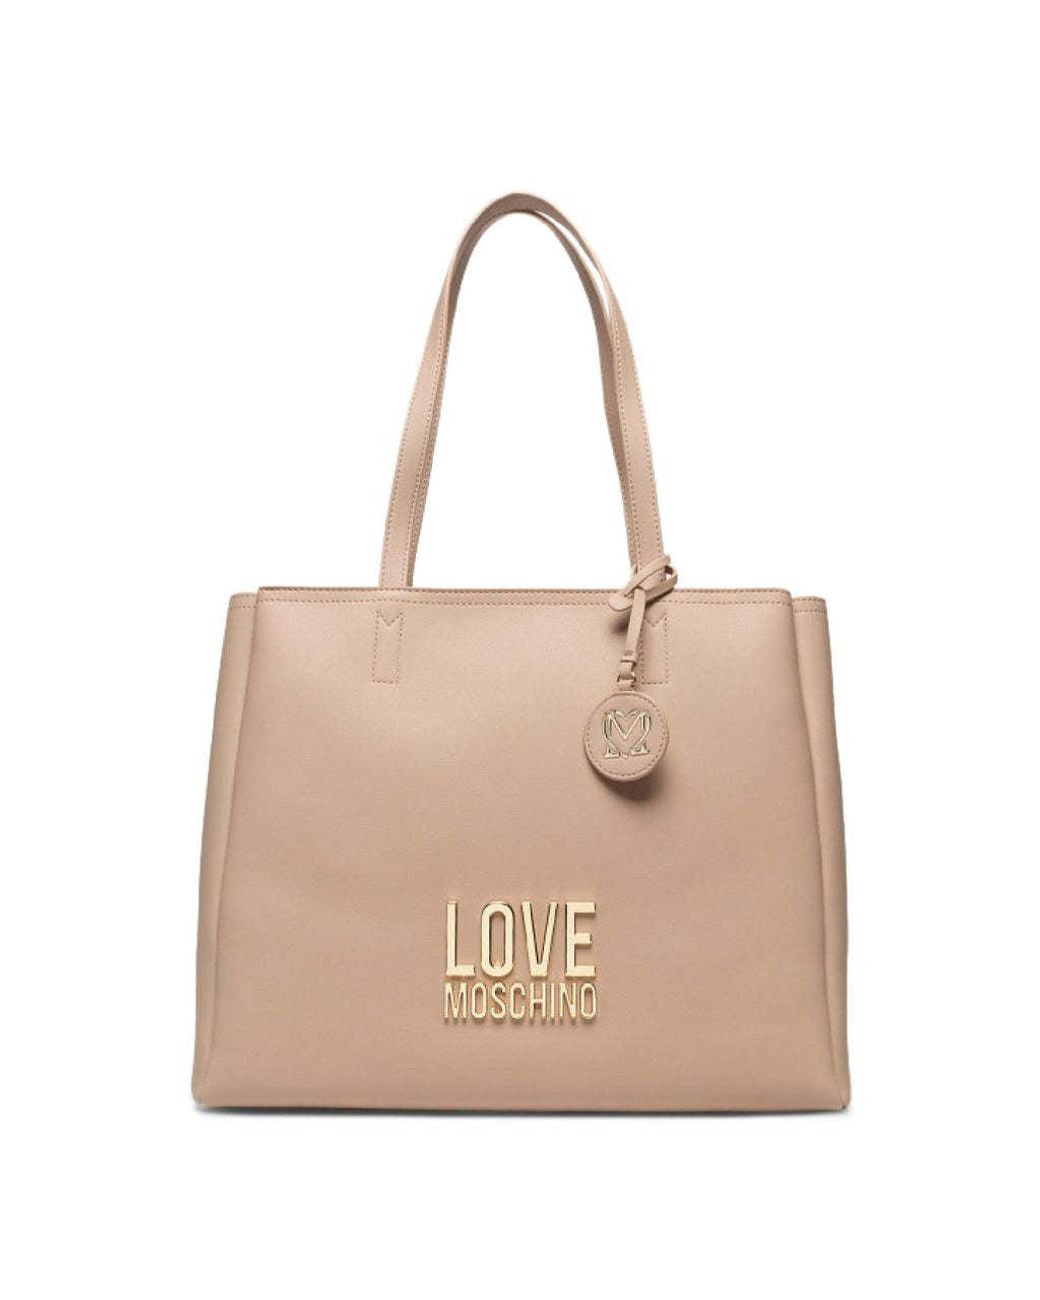 Love Moschino Tote Bags - Jc4100pp1elj0 - Brown - Save 1% - Lyst